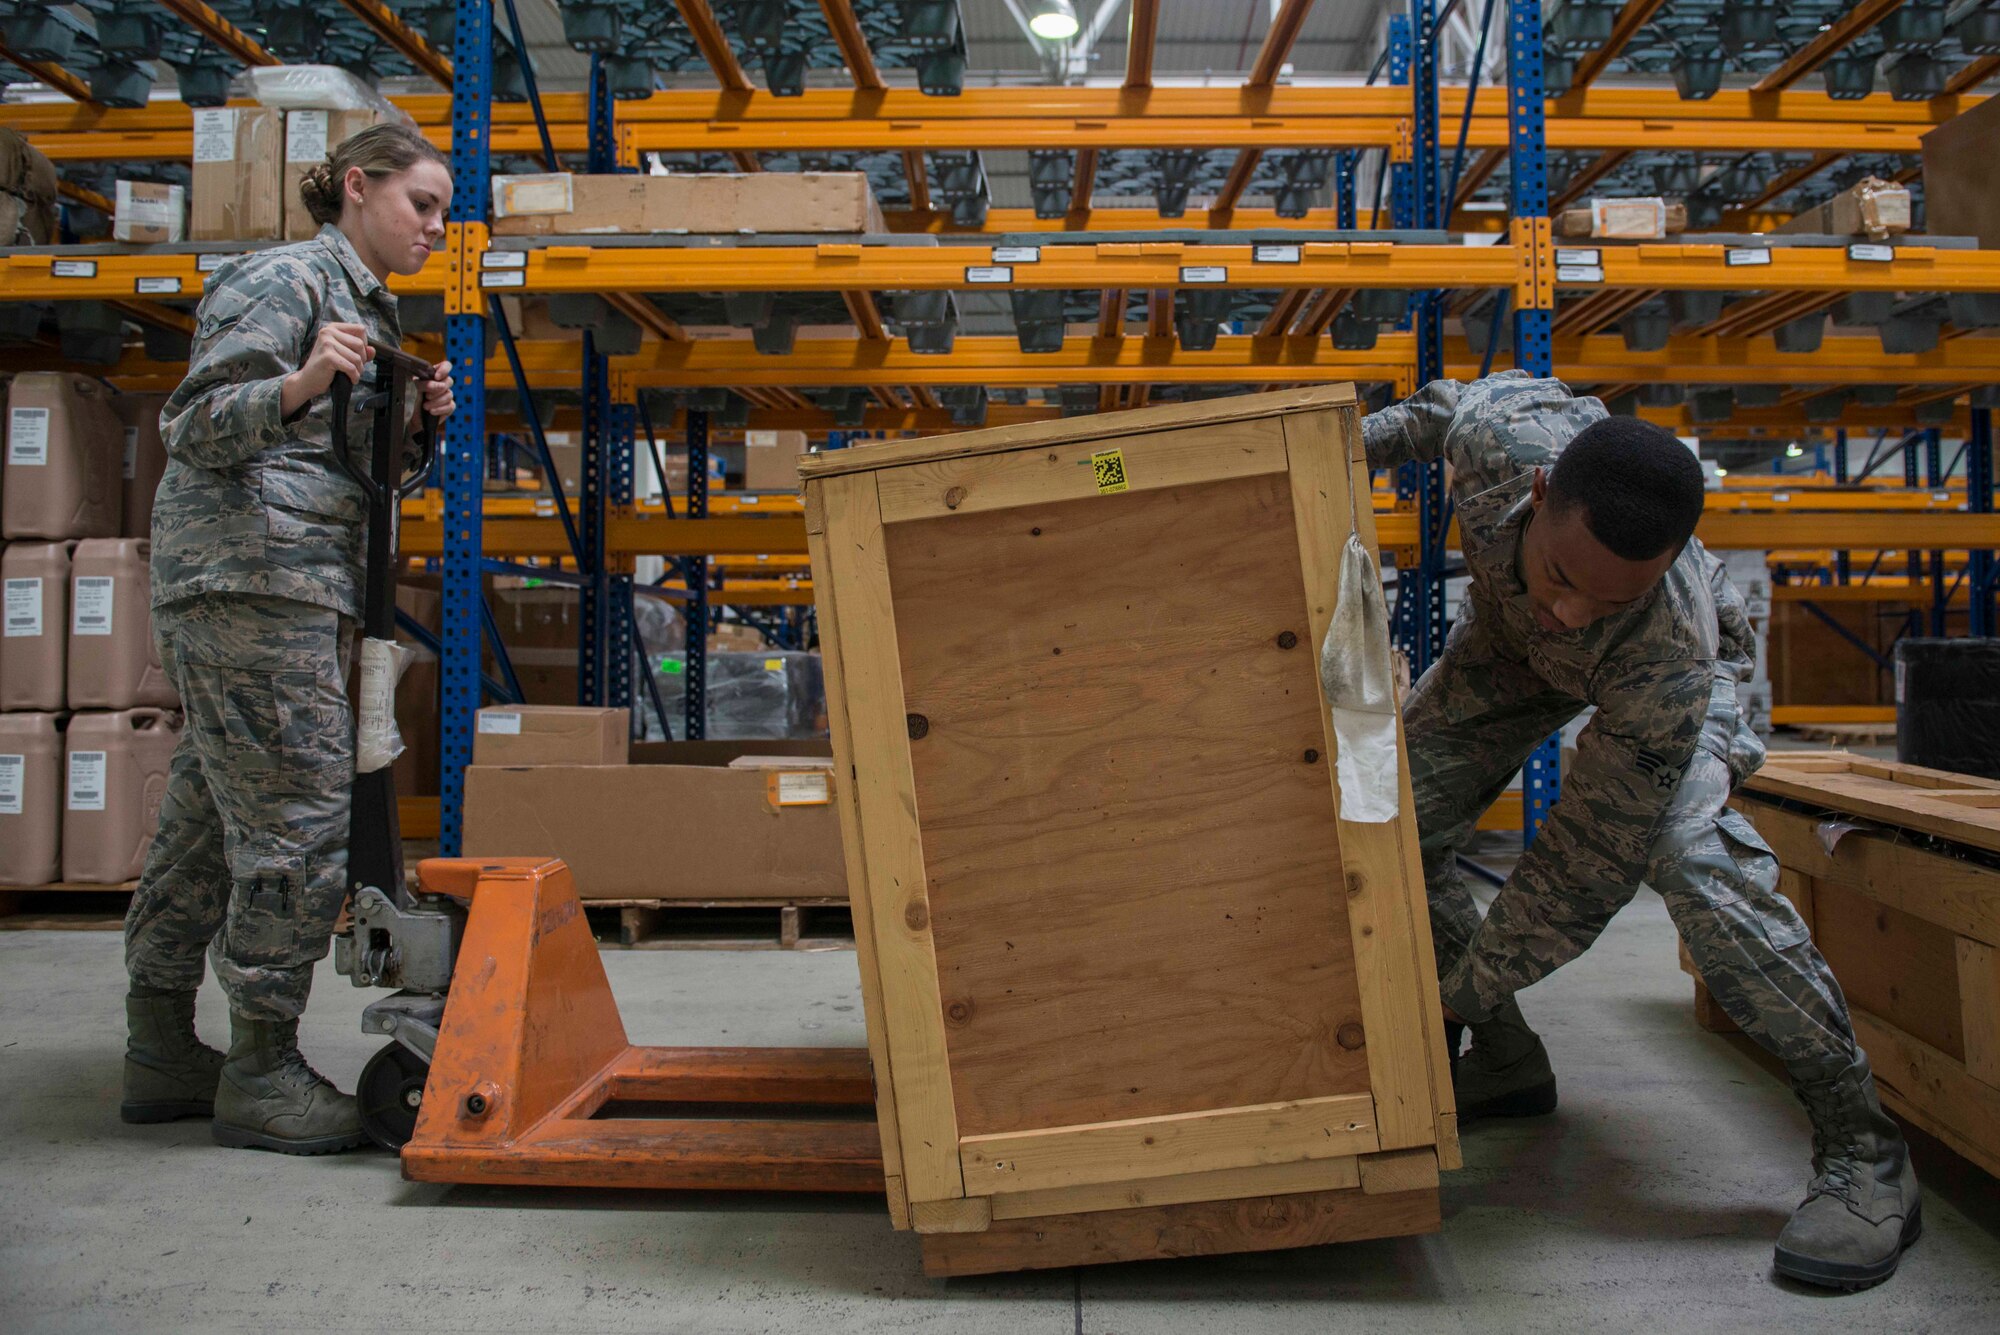 U.S. Air Force Airman Kennedy Trolinder (left), 39th Logistics Readiness Squadron (LRS) central storage apprentice, and Senior Airman Turon Boyd, 39th LRS service center journeyman, load cargo onto a pallet jack in the supply warehouse Oct. 4, 2016, at Incirlik Air Base, Turkey. The warehouse contains a broad spectrum of items to support base units and agencies. (U.S. Air Force photo by Senior Airman John Nieves Camacho)